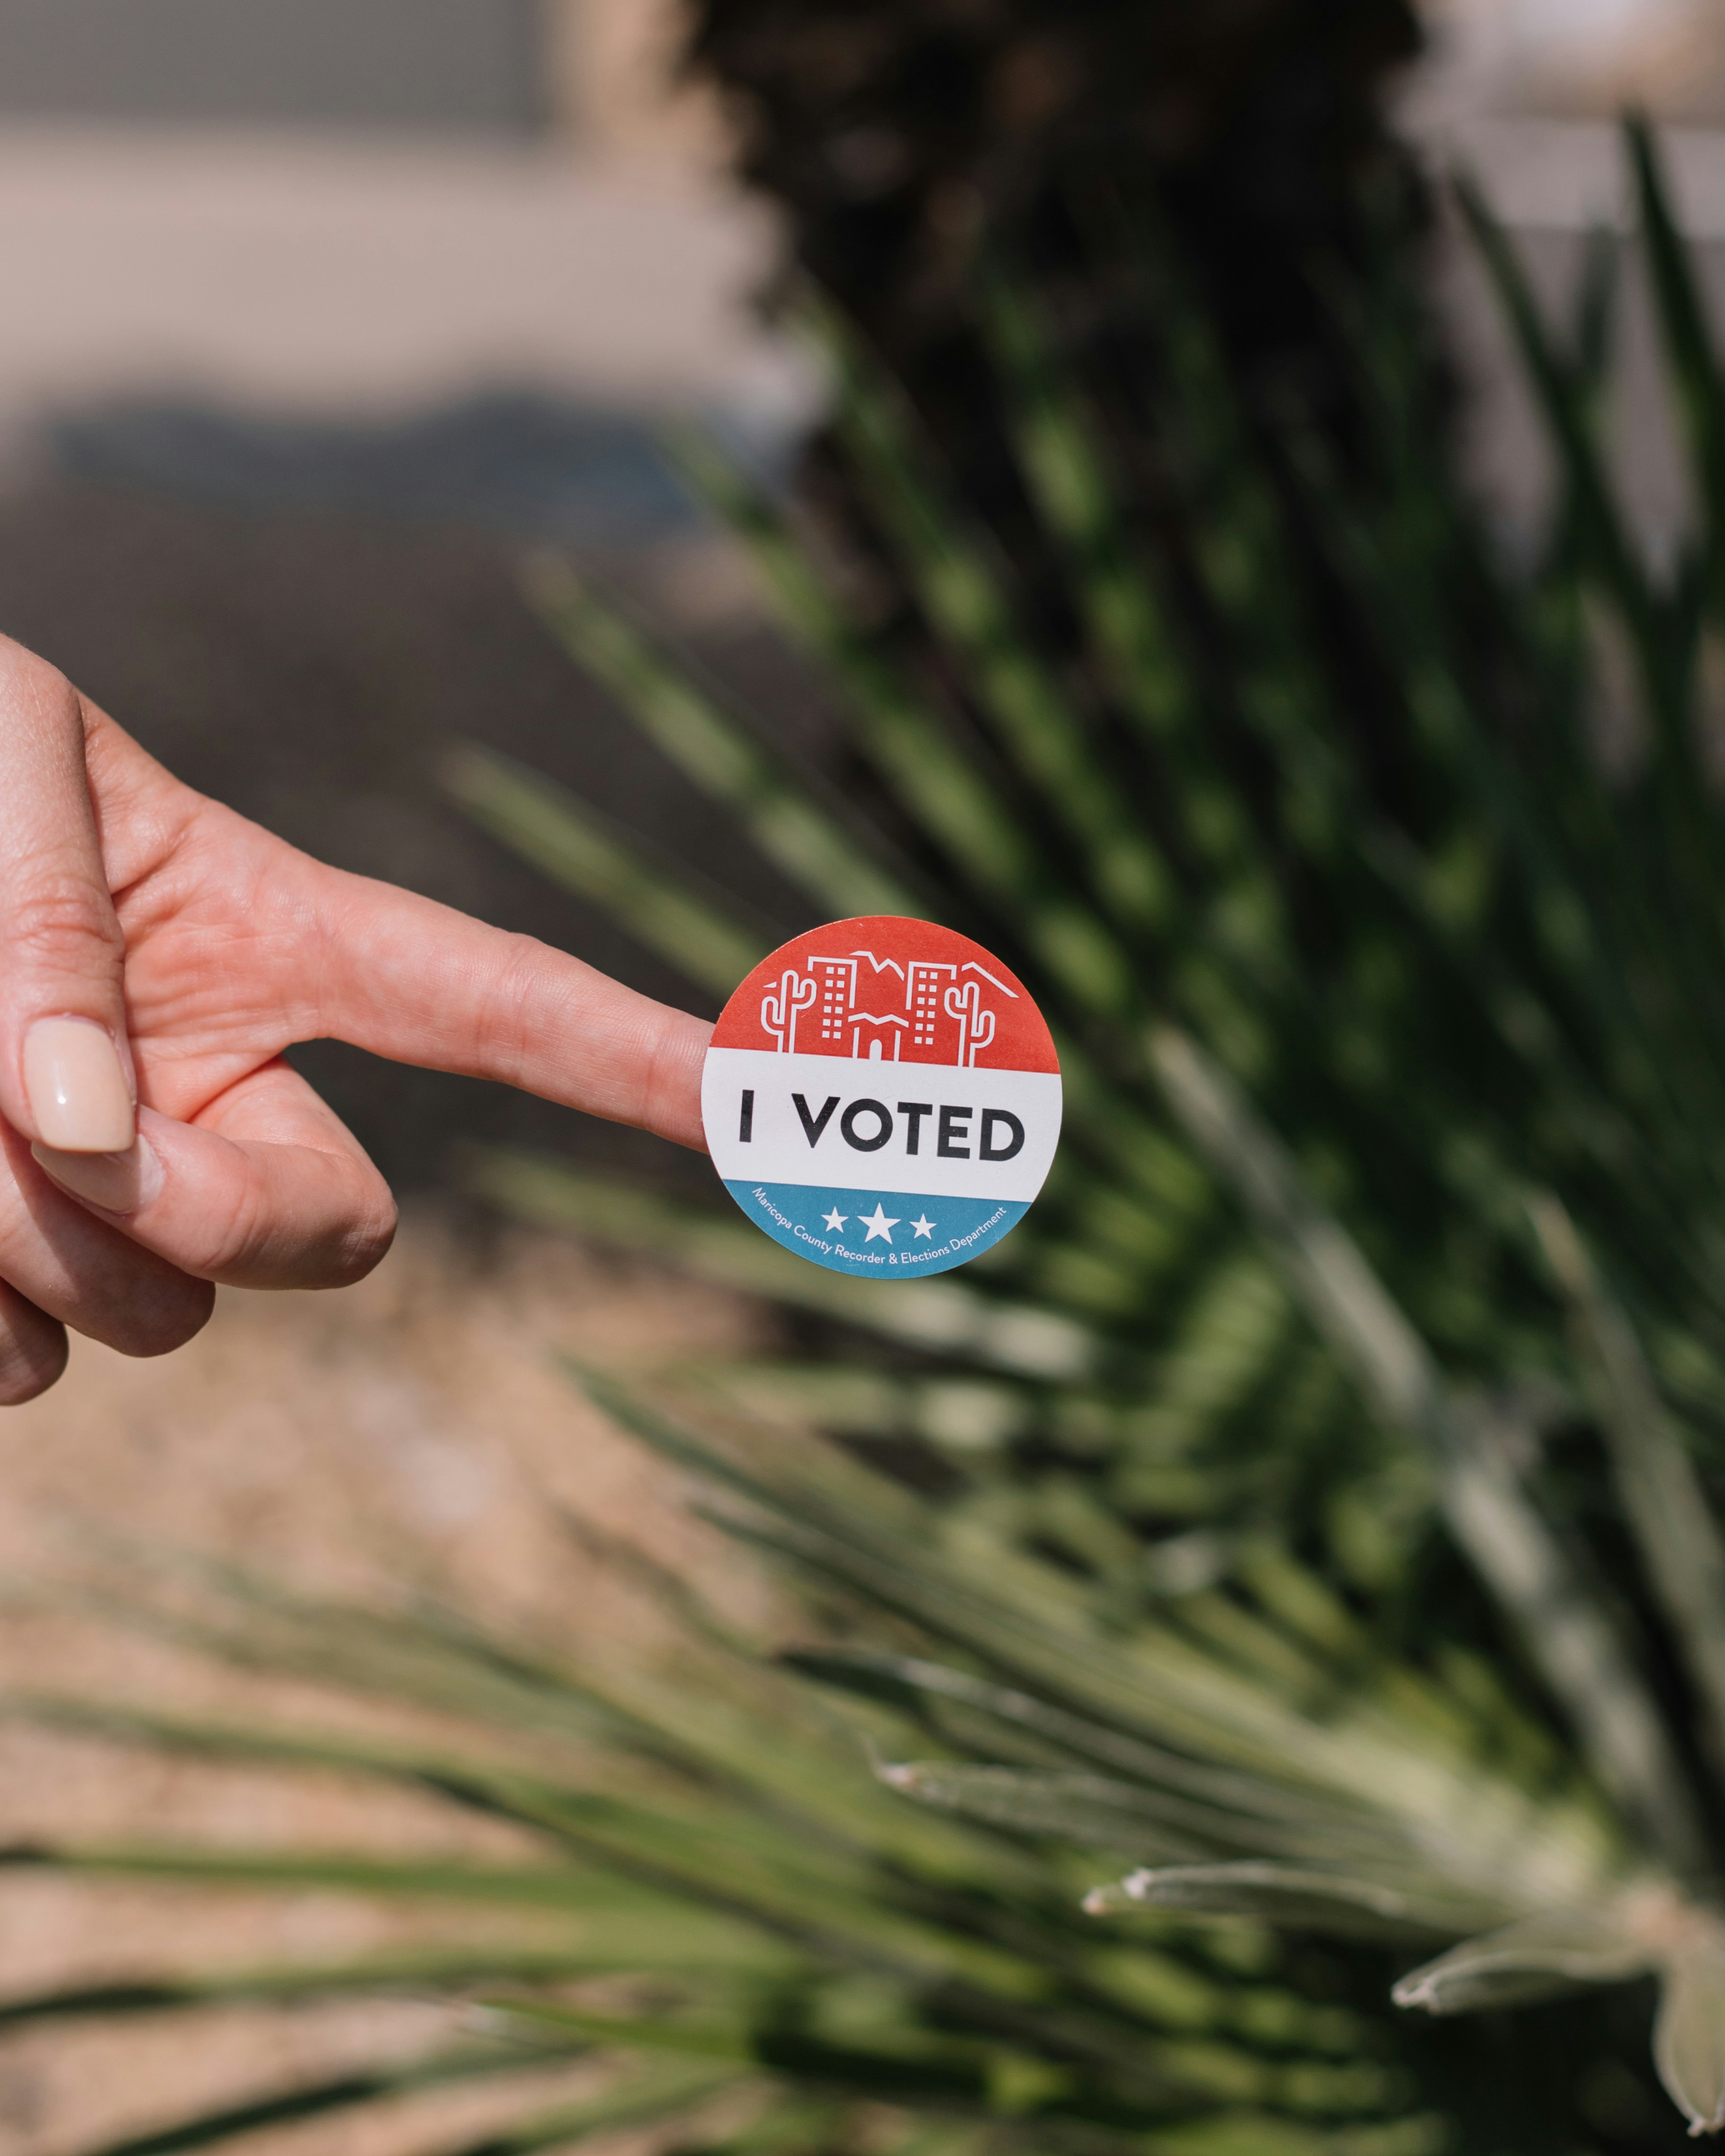 Arizona desert themed I voted voting sticker with palm tree and desert landscaping in background.